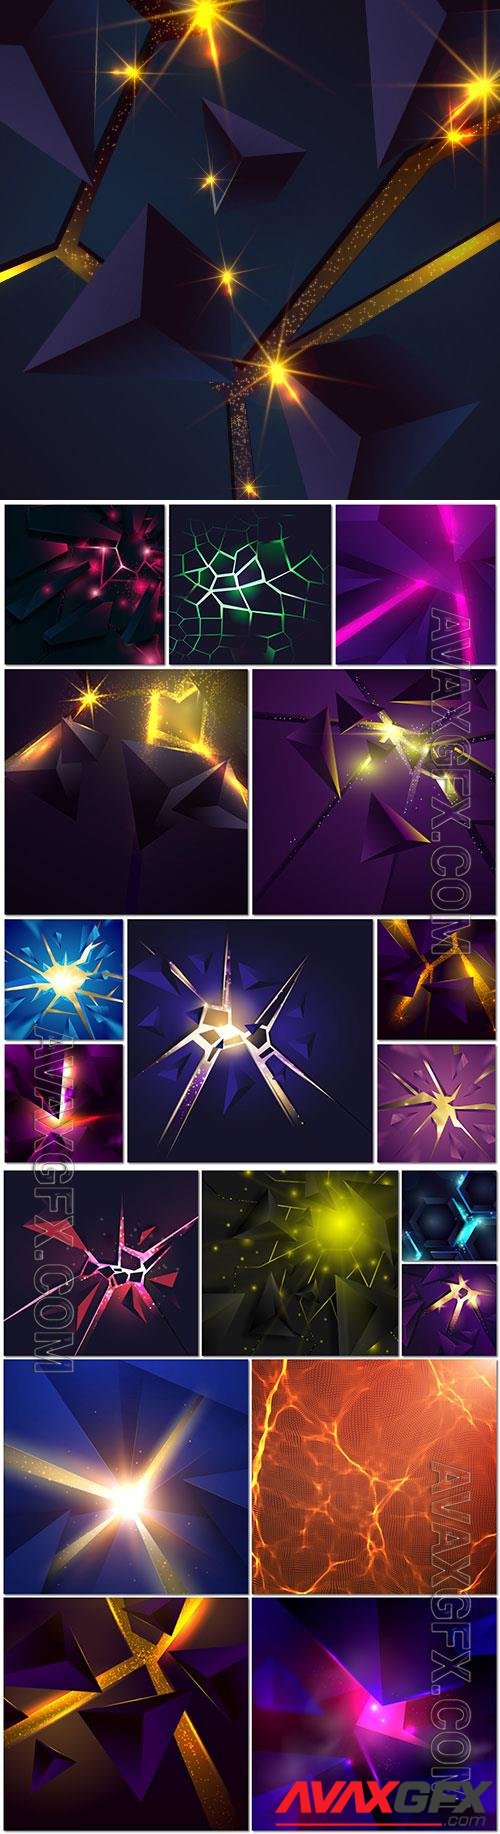 3d explosion with light background in vector